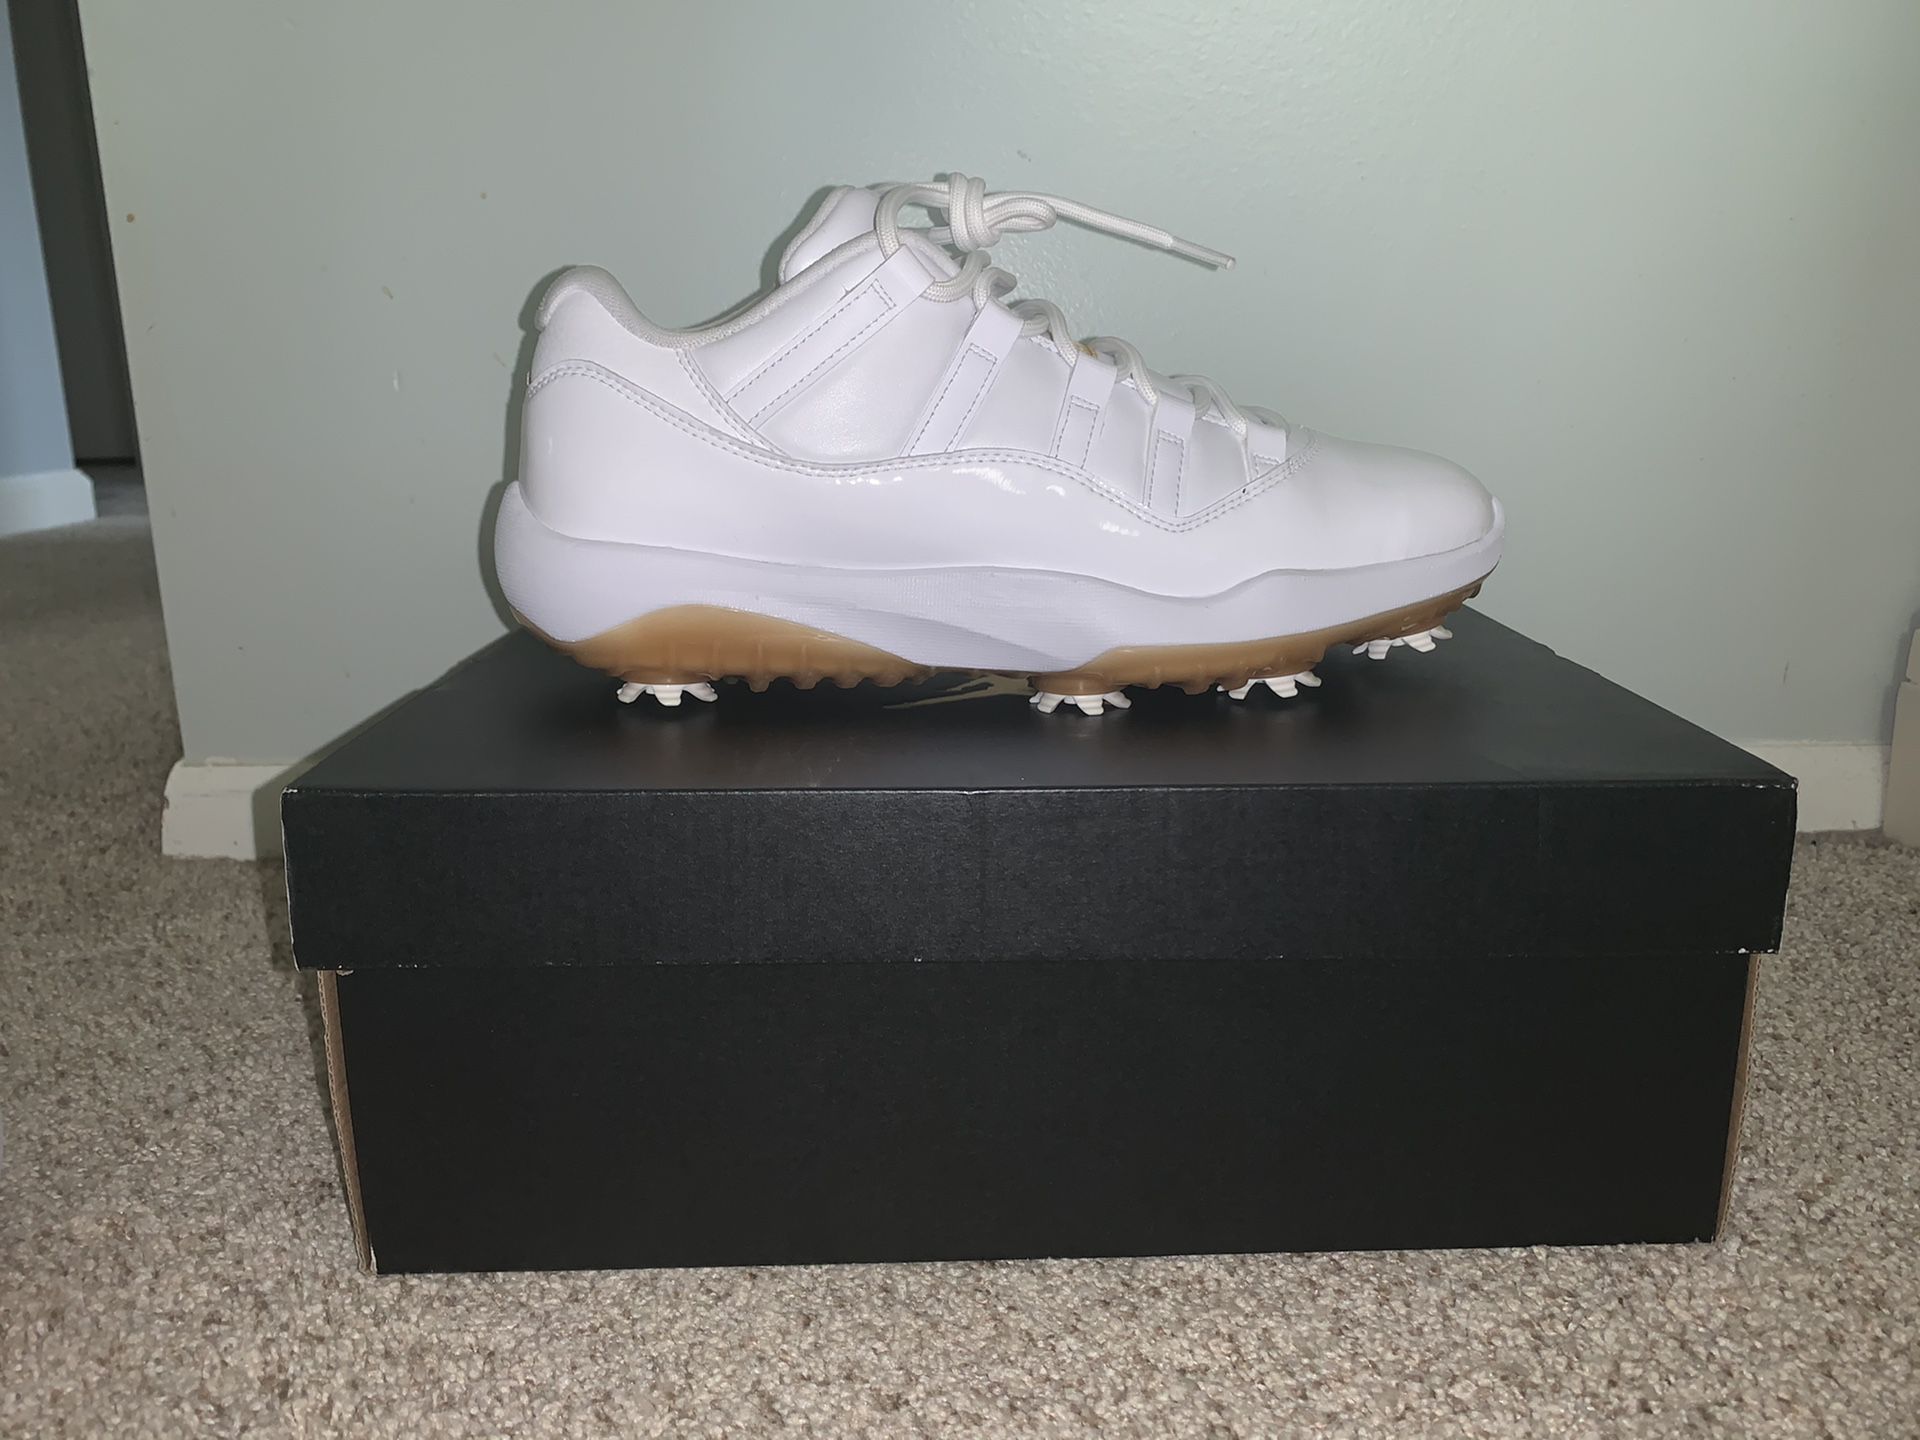 Air Jordan 11 Low retro size 11 golf shoes brand new in box